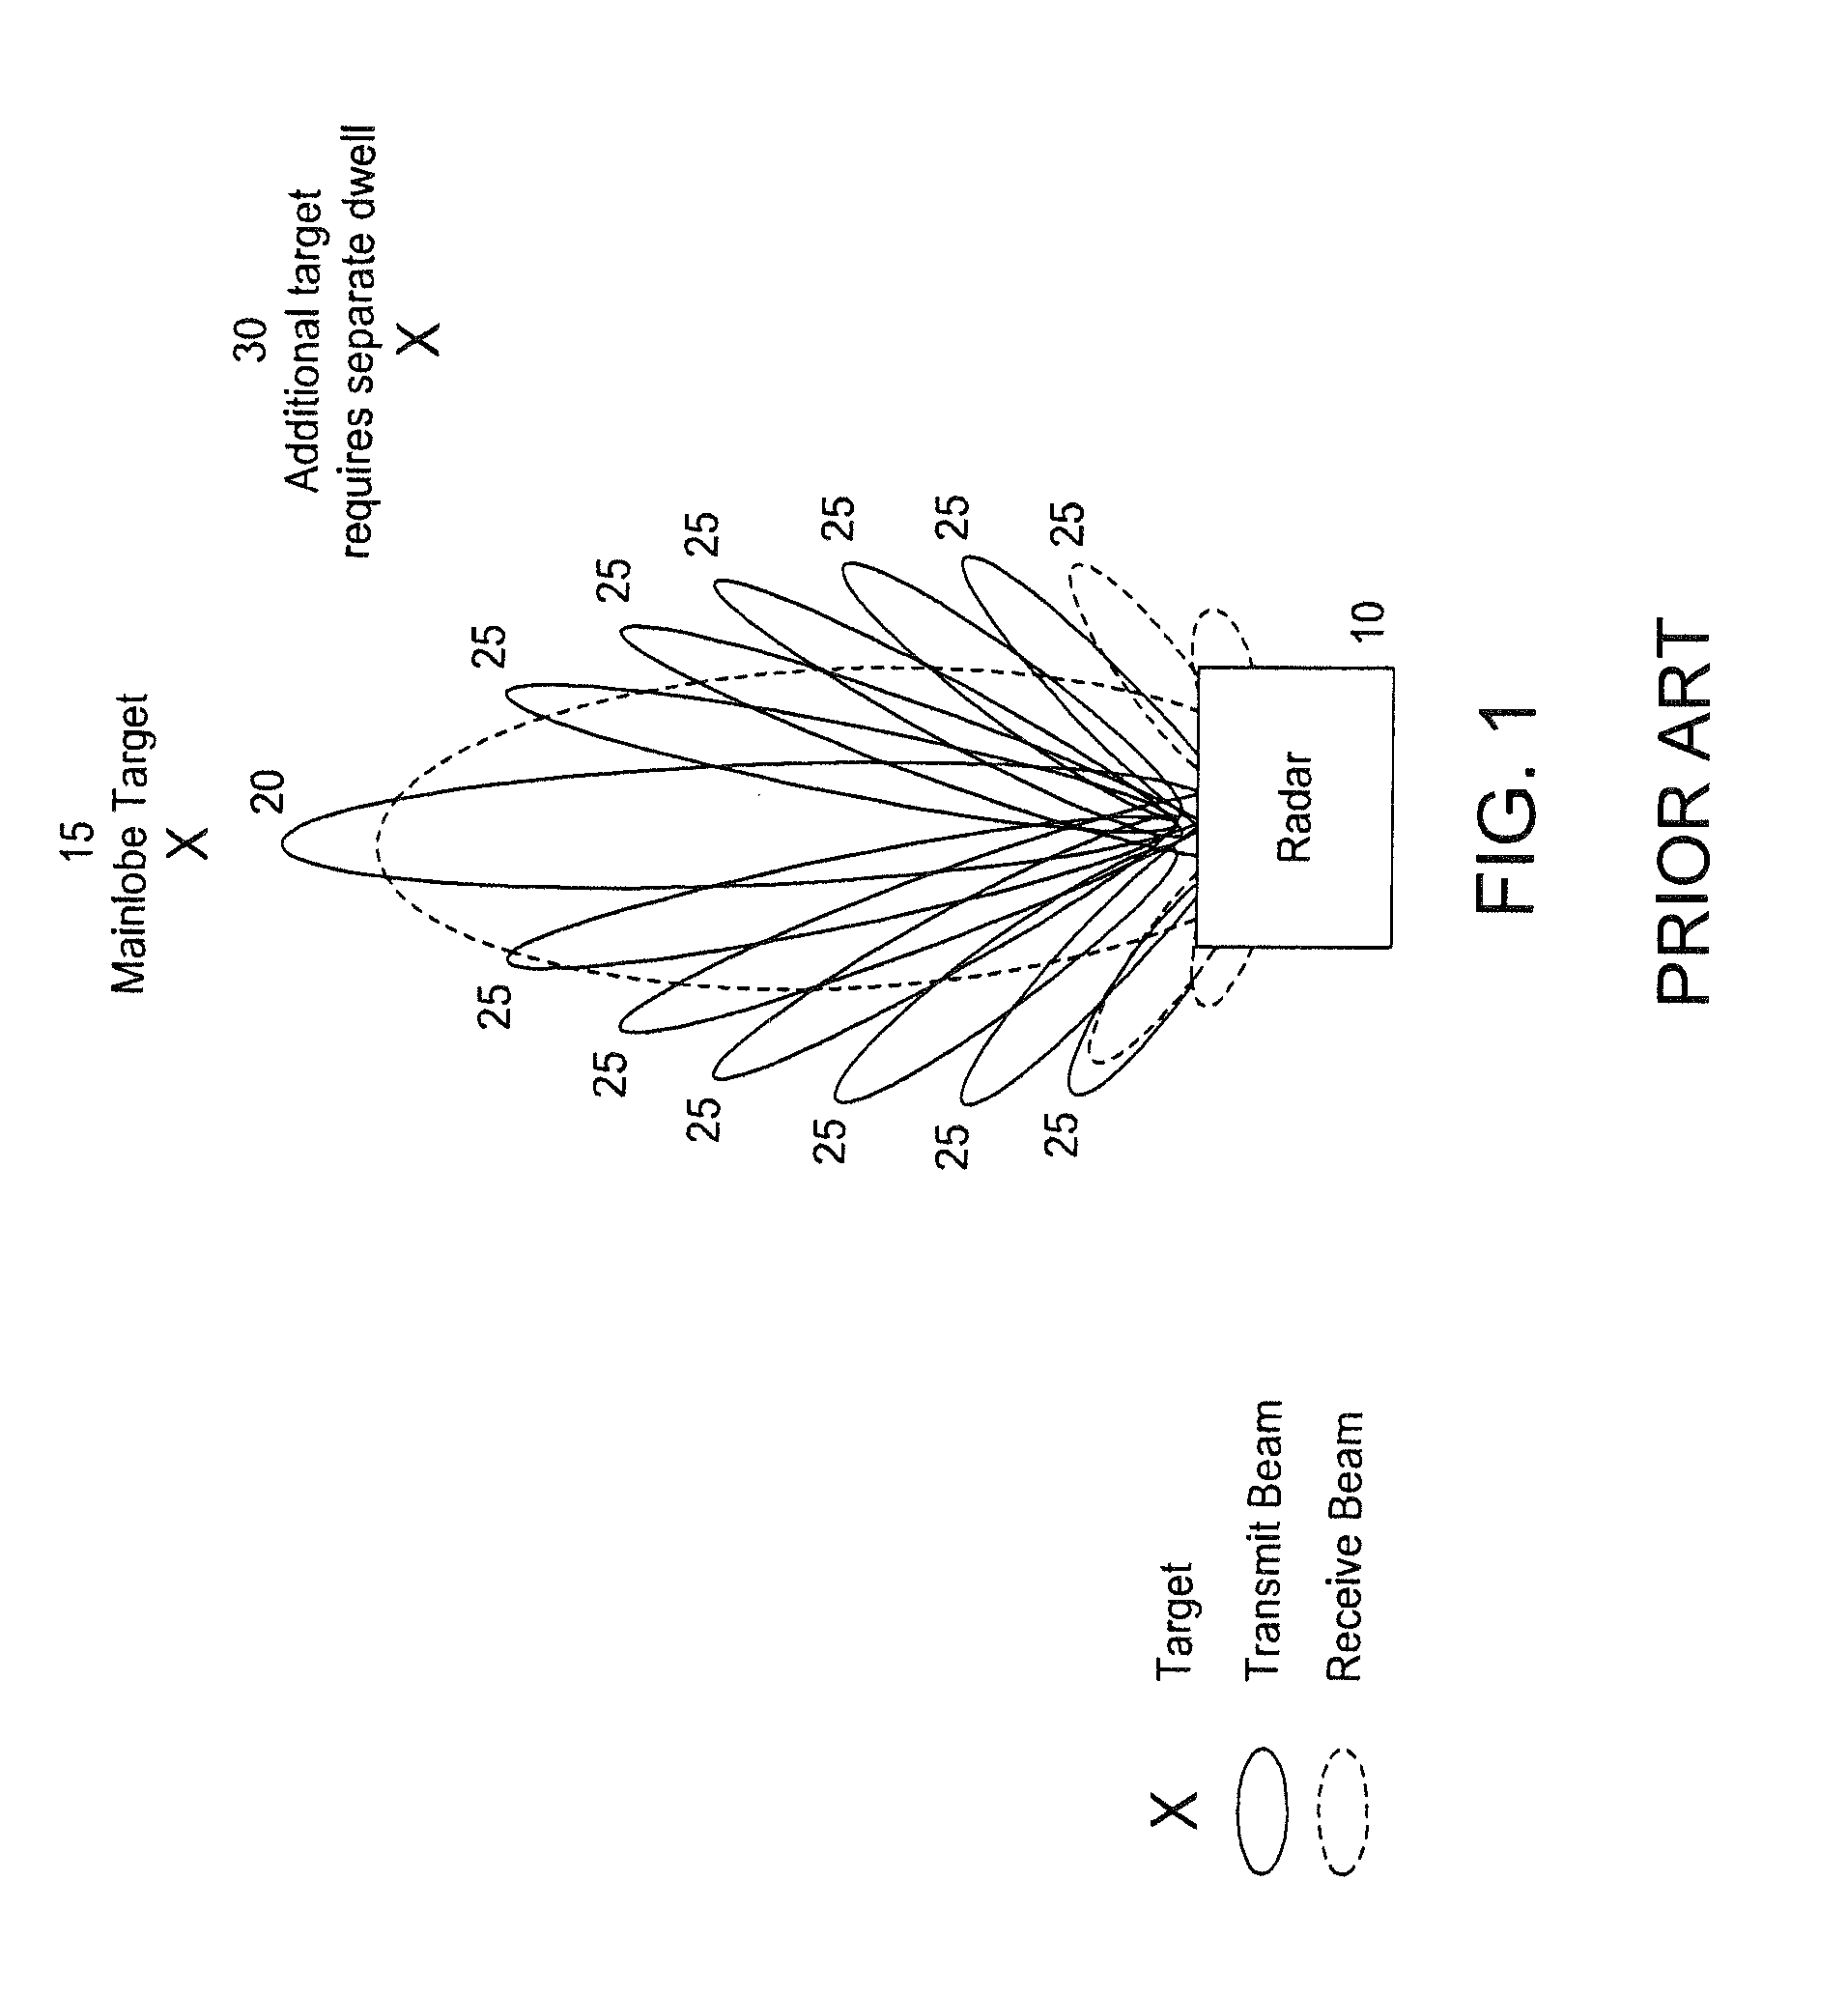 Multiple simultaneous transmit track beams using phase-only pattern synthesis